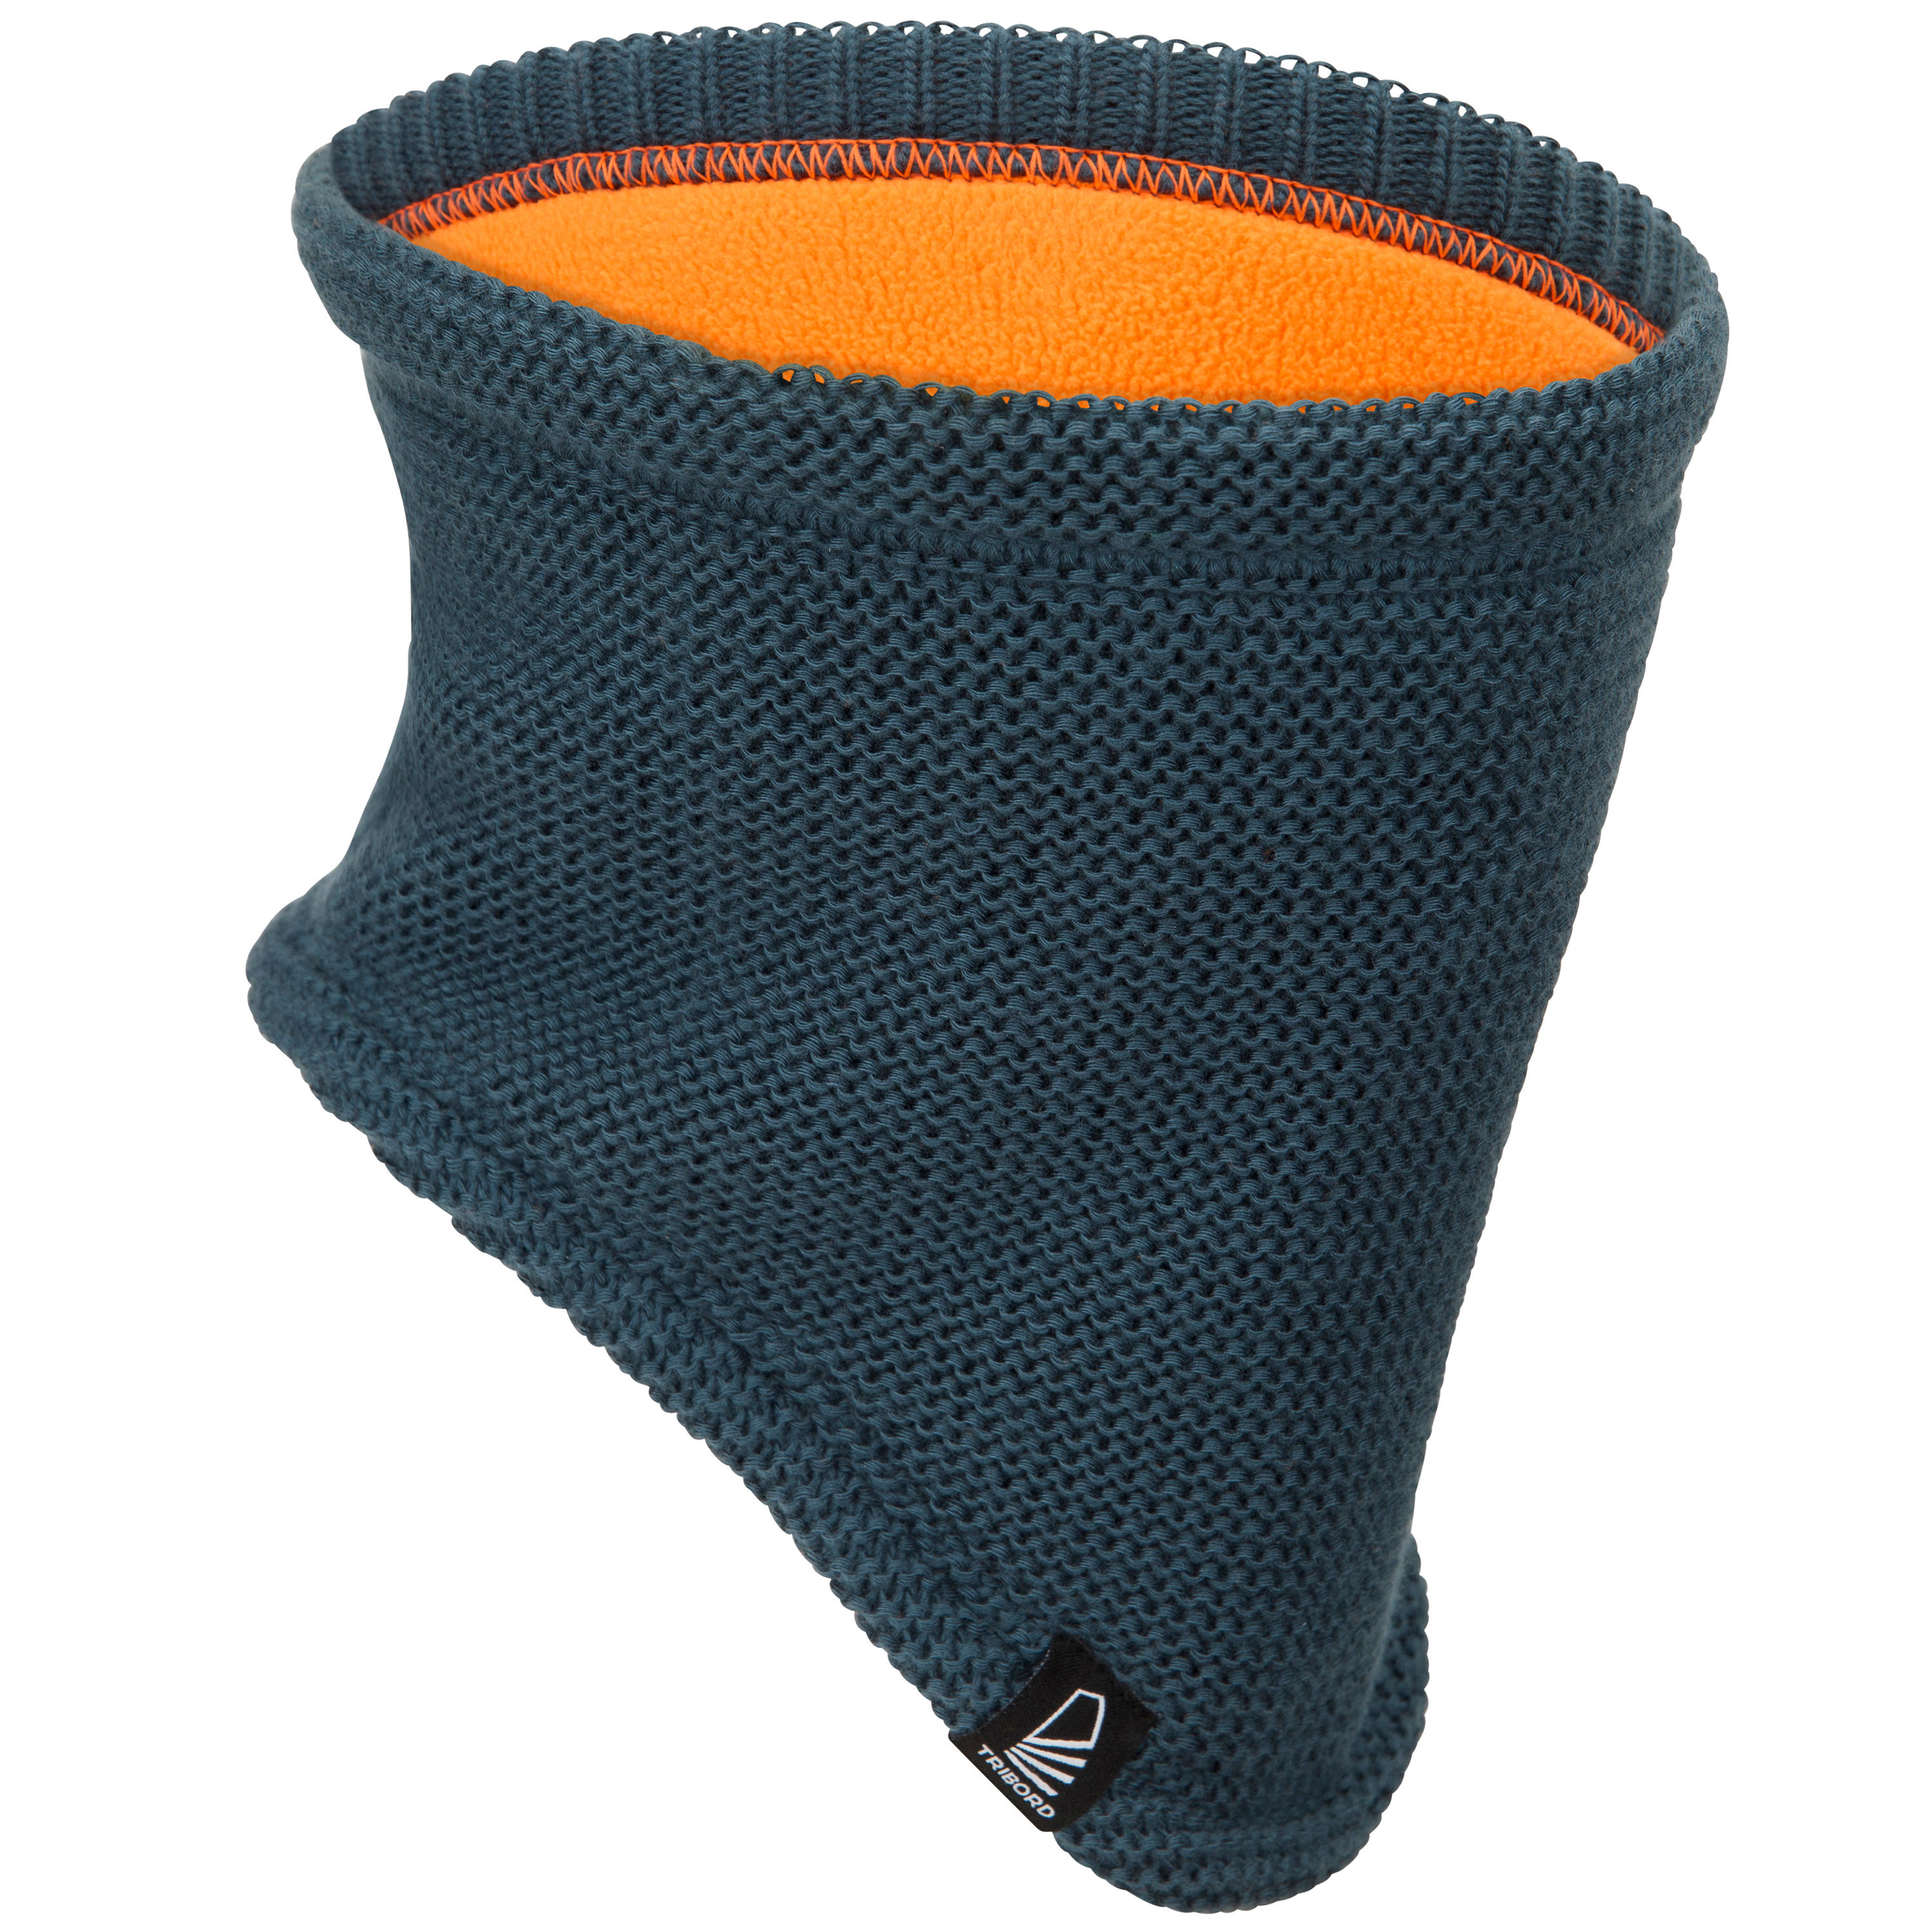 Adult's windproof neck warmer SAILING 100 - Grey 1/6